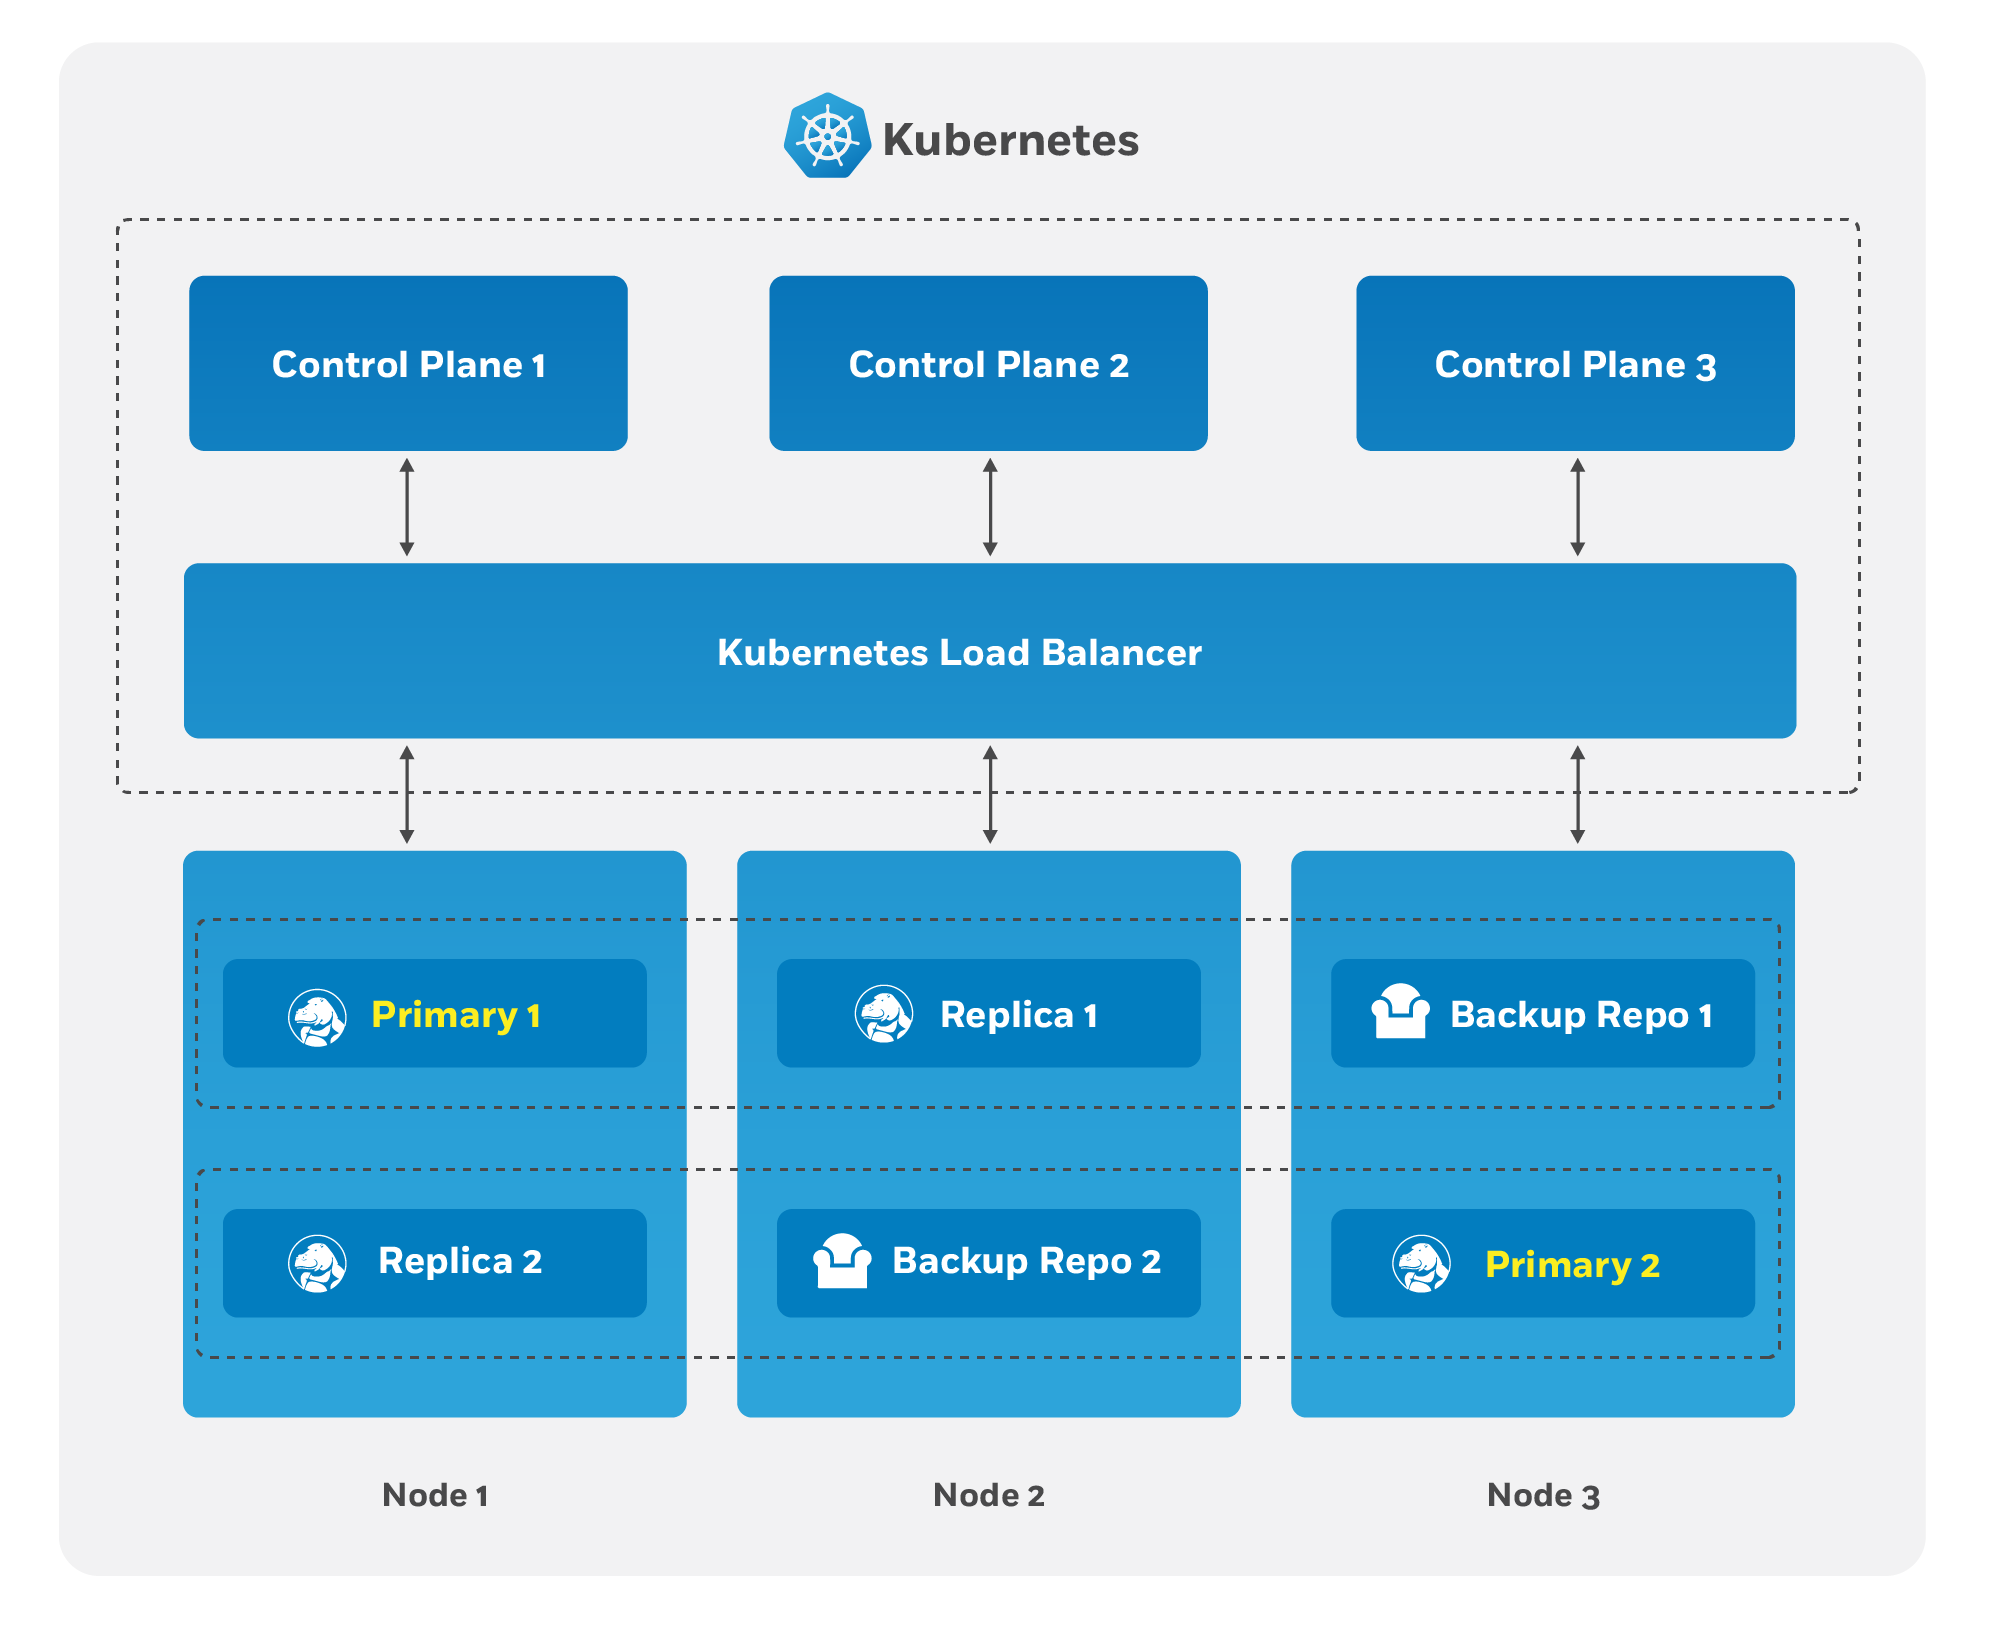 image showing kubernetes control plane with Crunchy Postgres replicate and backups